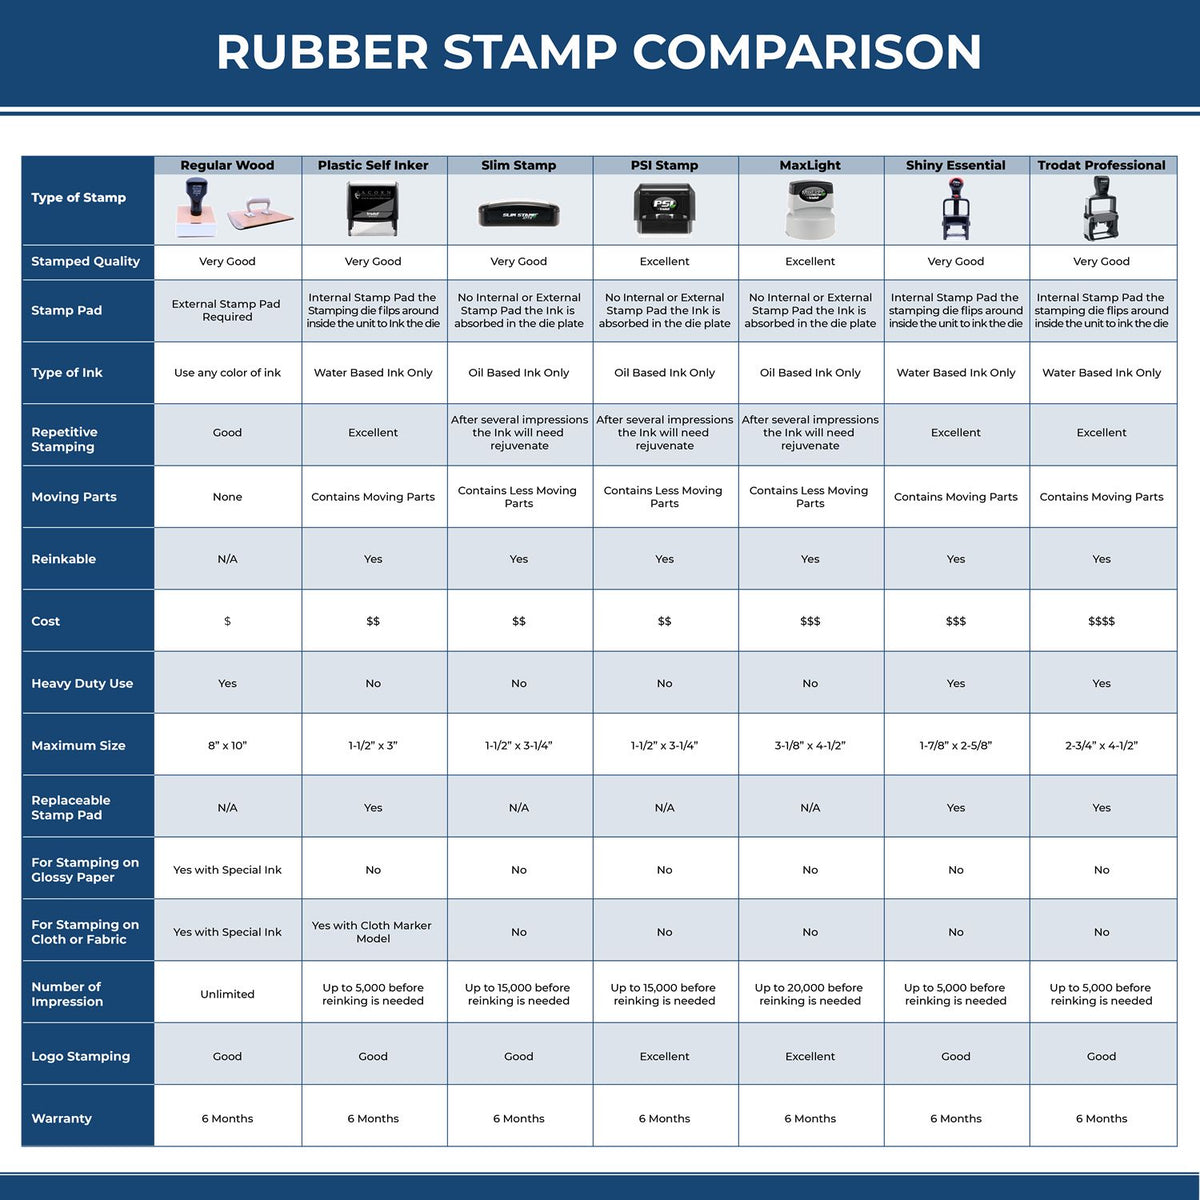 A comparison chart for the different types of mount models available for the Super Slim Kansas Notary Public Stamp.